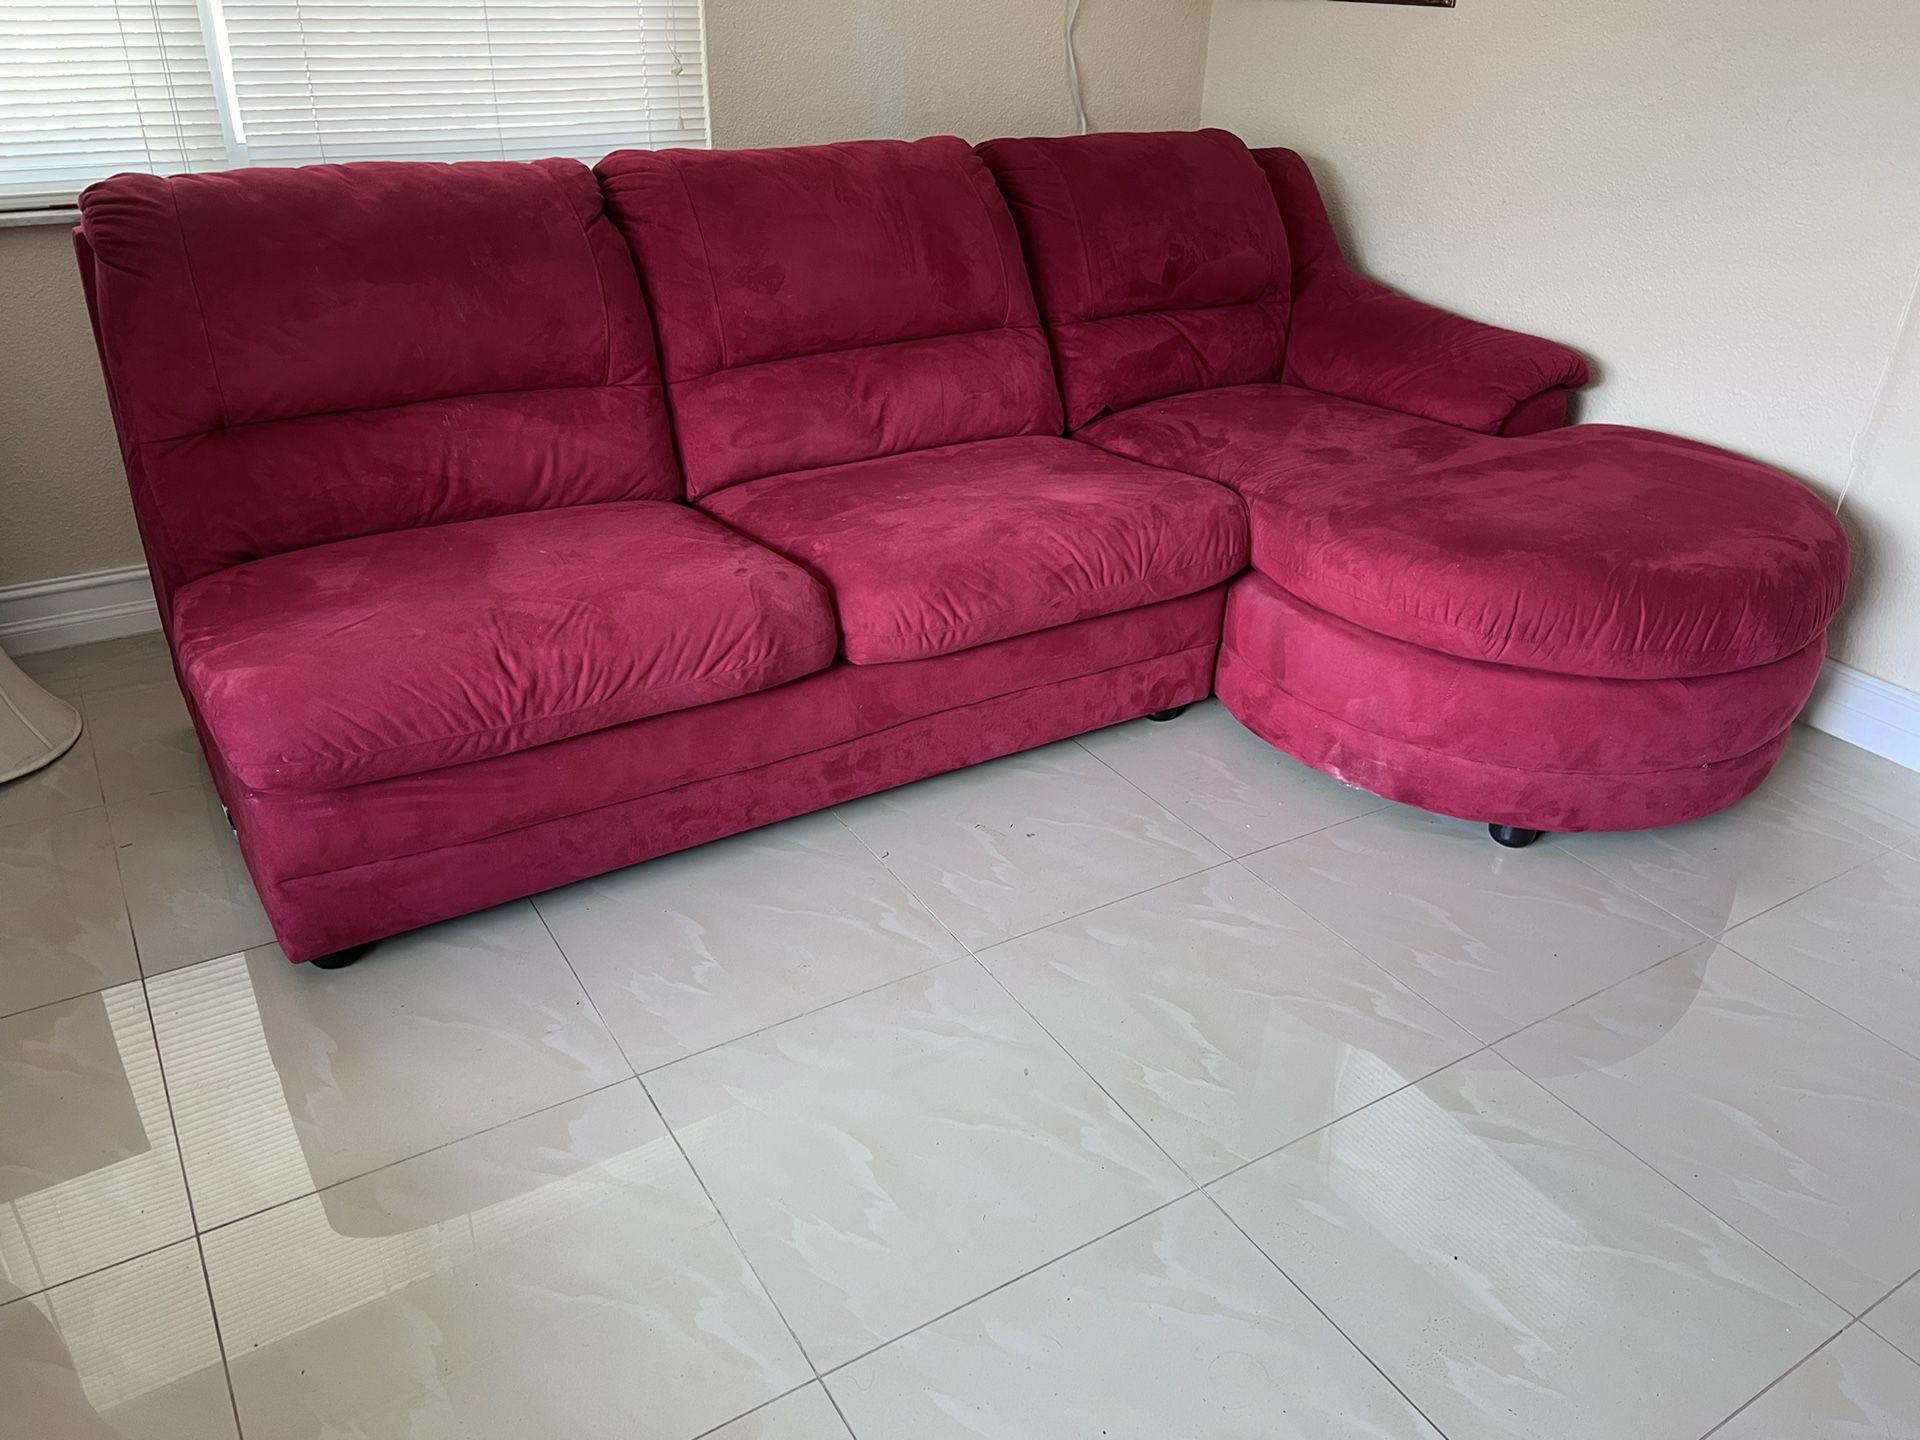 Red suede Sleeper Sofa